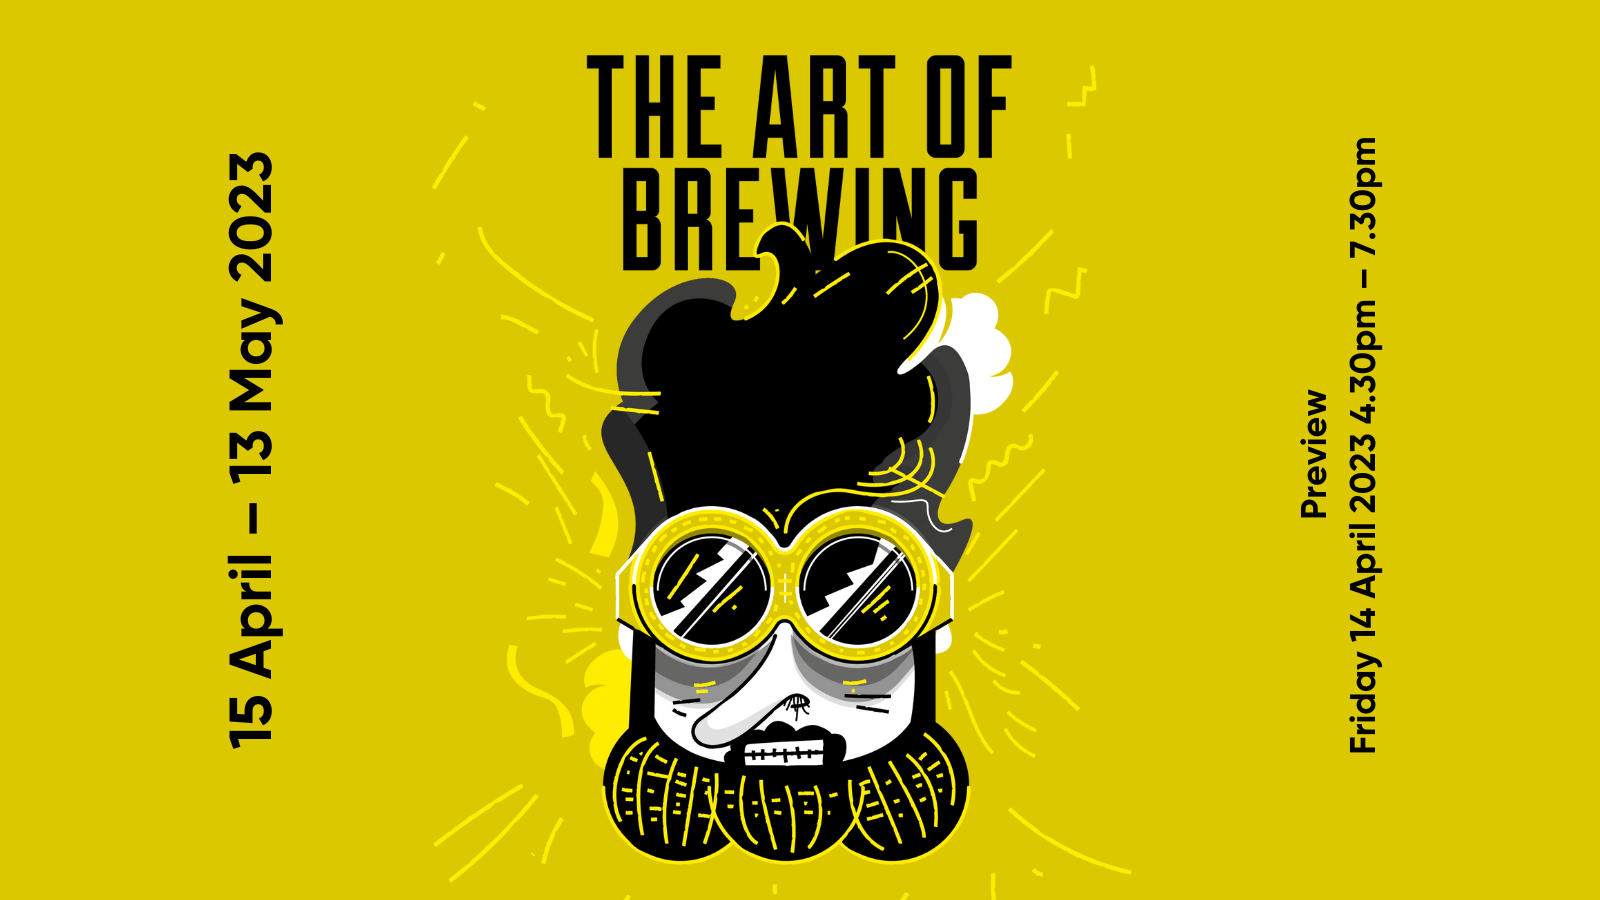 The Art of Brewing – an exhibition over 30 years in the making